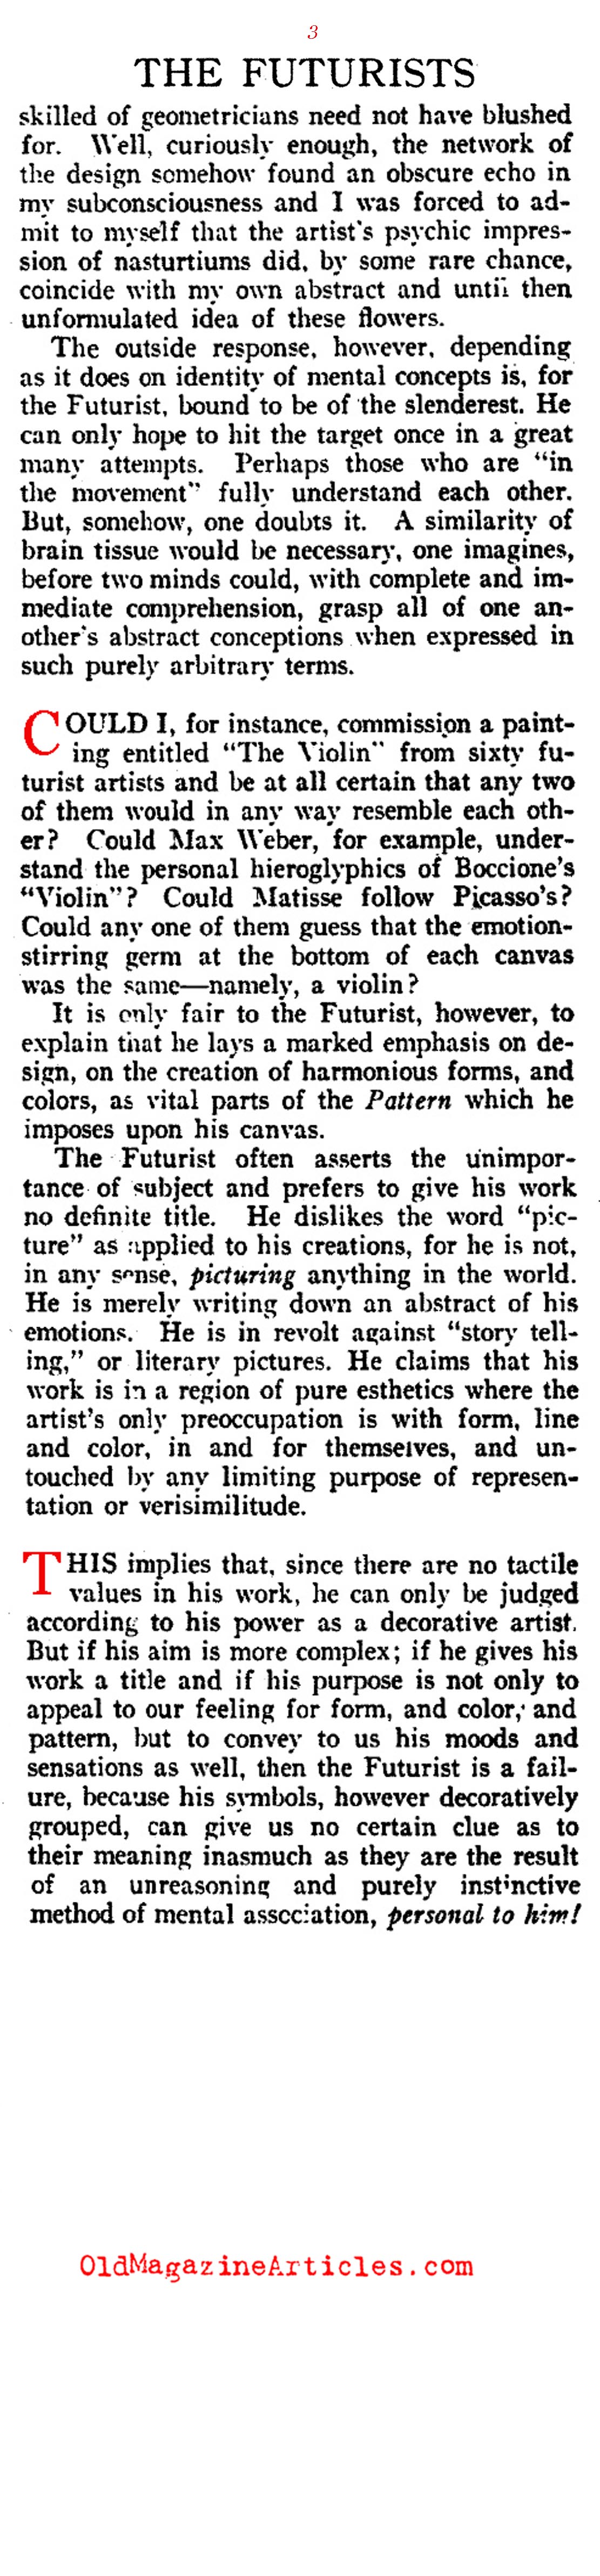 Harsh Words for the Futurists (Vanity Fair, 1916)